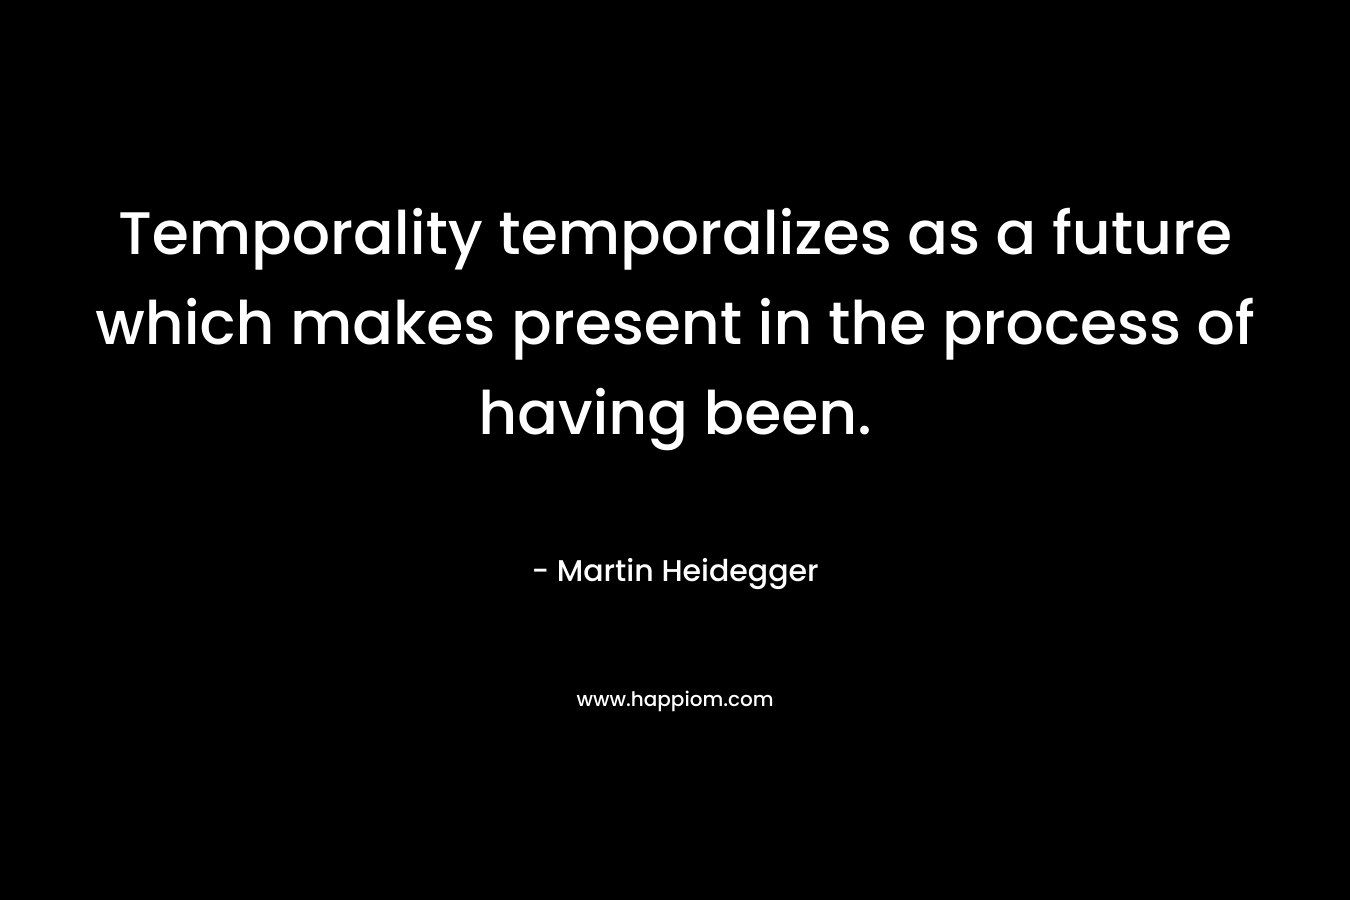 Temporality temporalizes as a future which makes present in the process of having been.